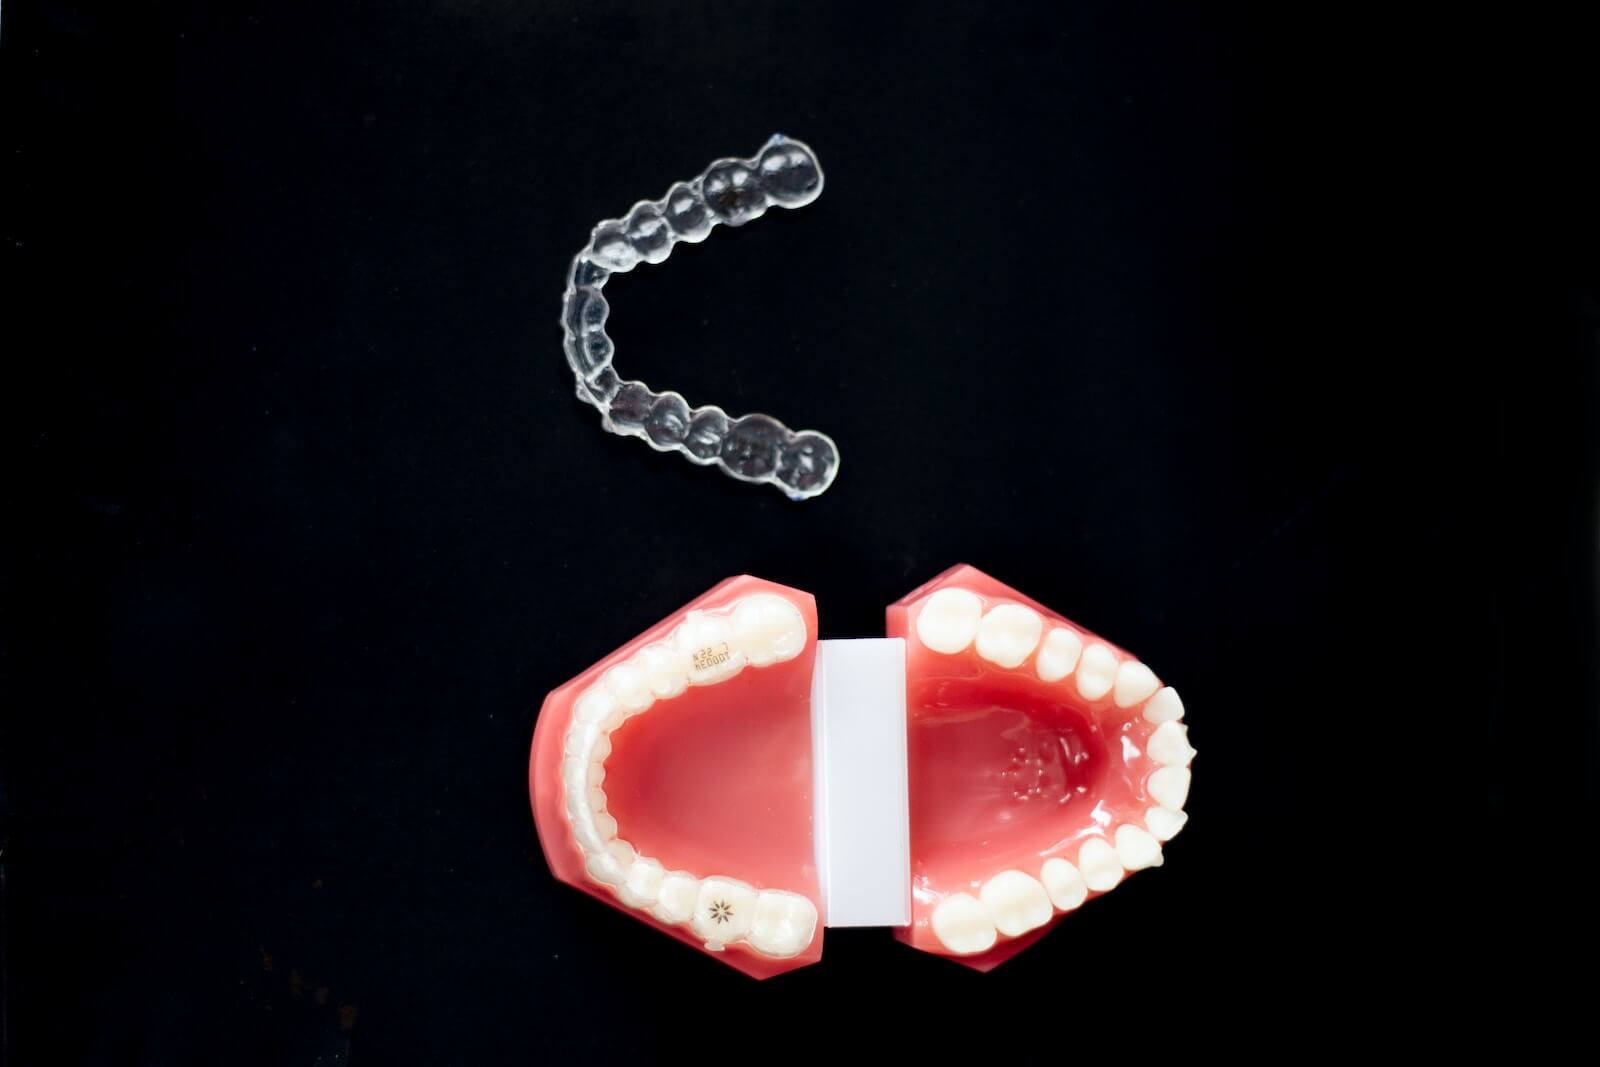 A mouthguard and tooth mold